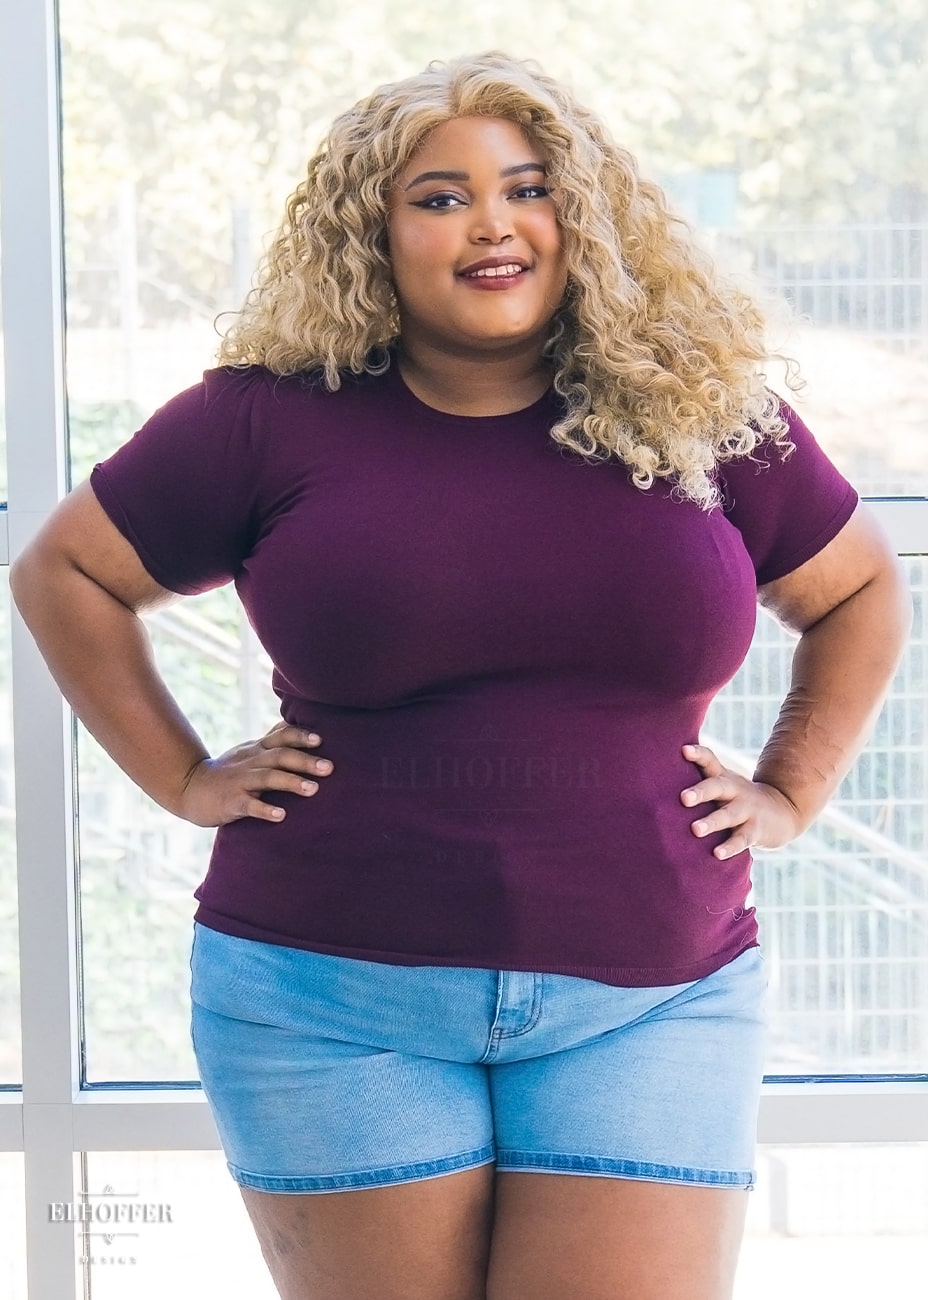 Jade, a medium dark skinned 2XL model with curly blonde hair, is wearing a dark cherry knit short sleeve tee style top. The top has a high round neckline and the hem of the top falls to the hips. The shoulders are slightly gathered.